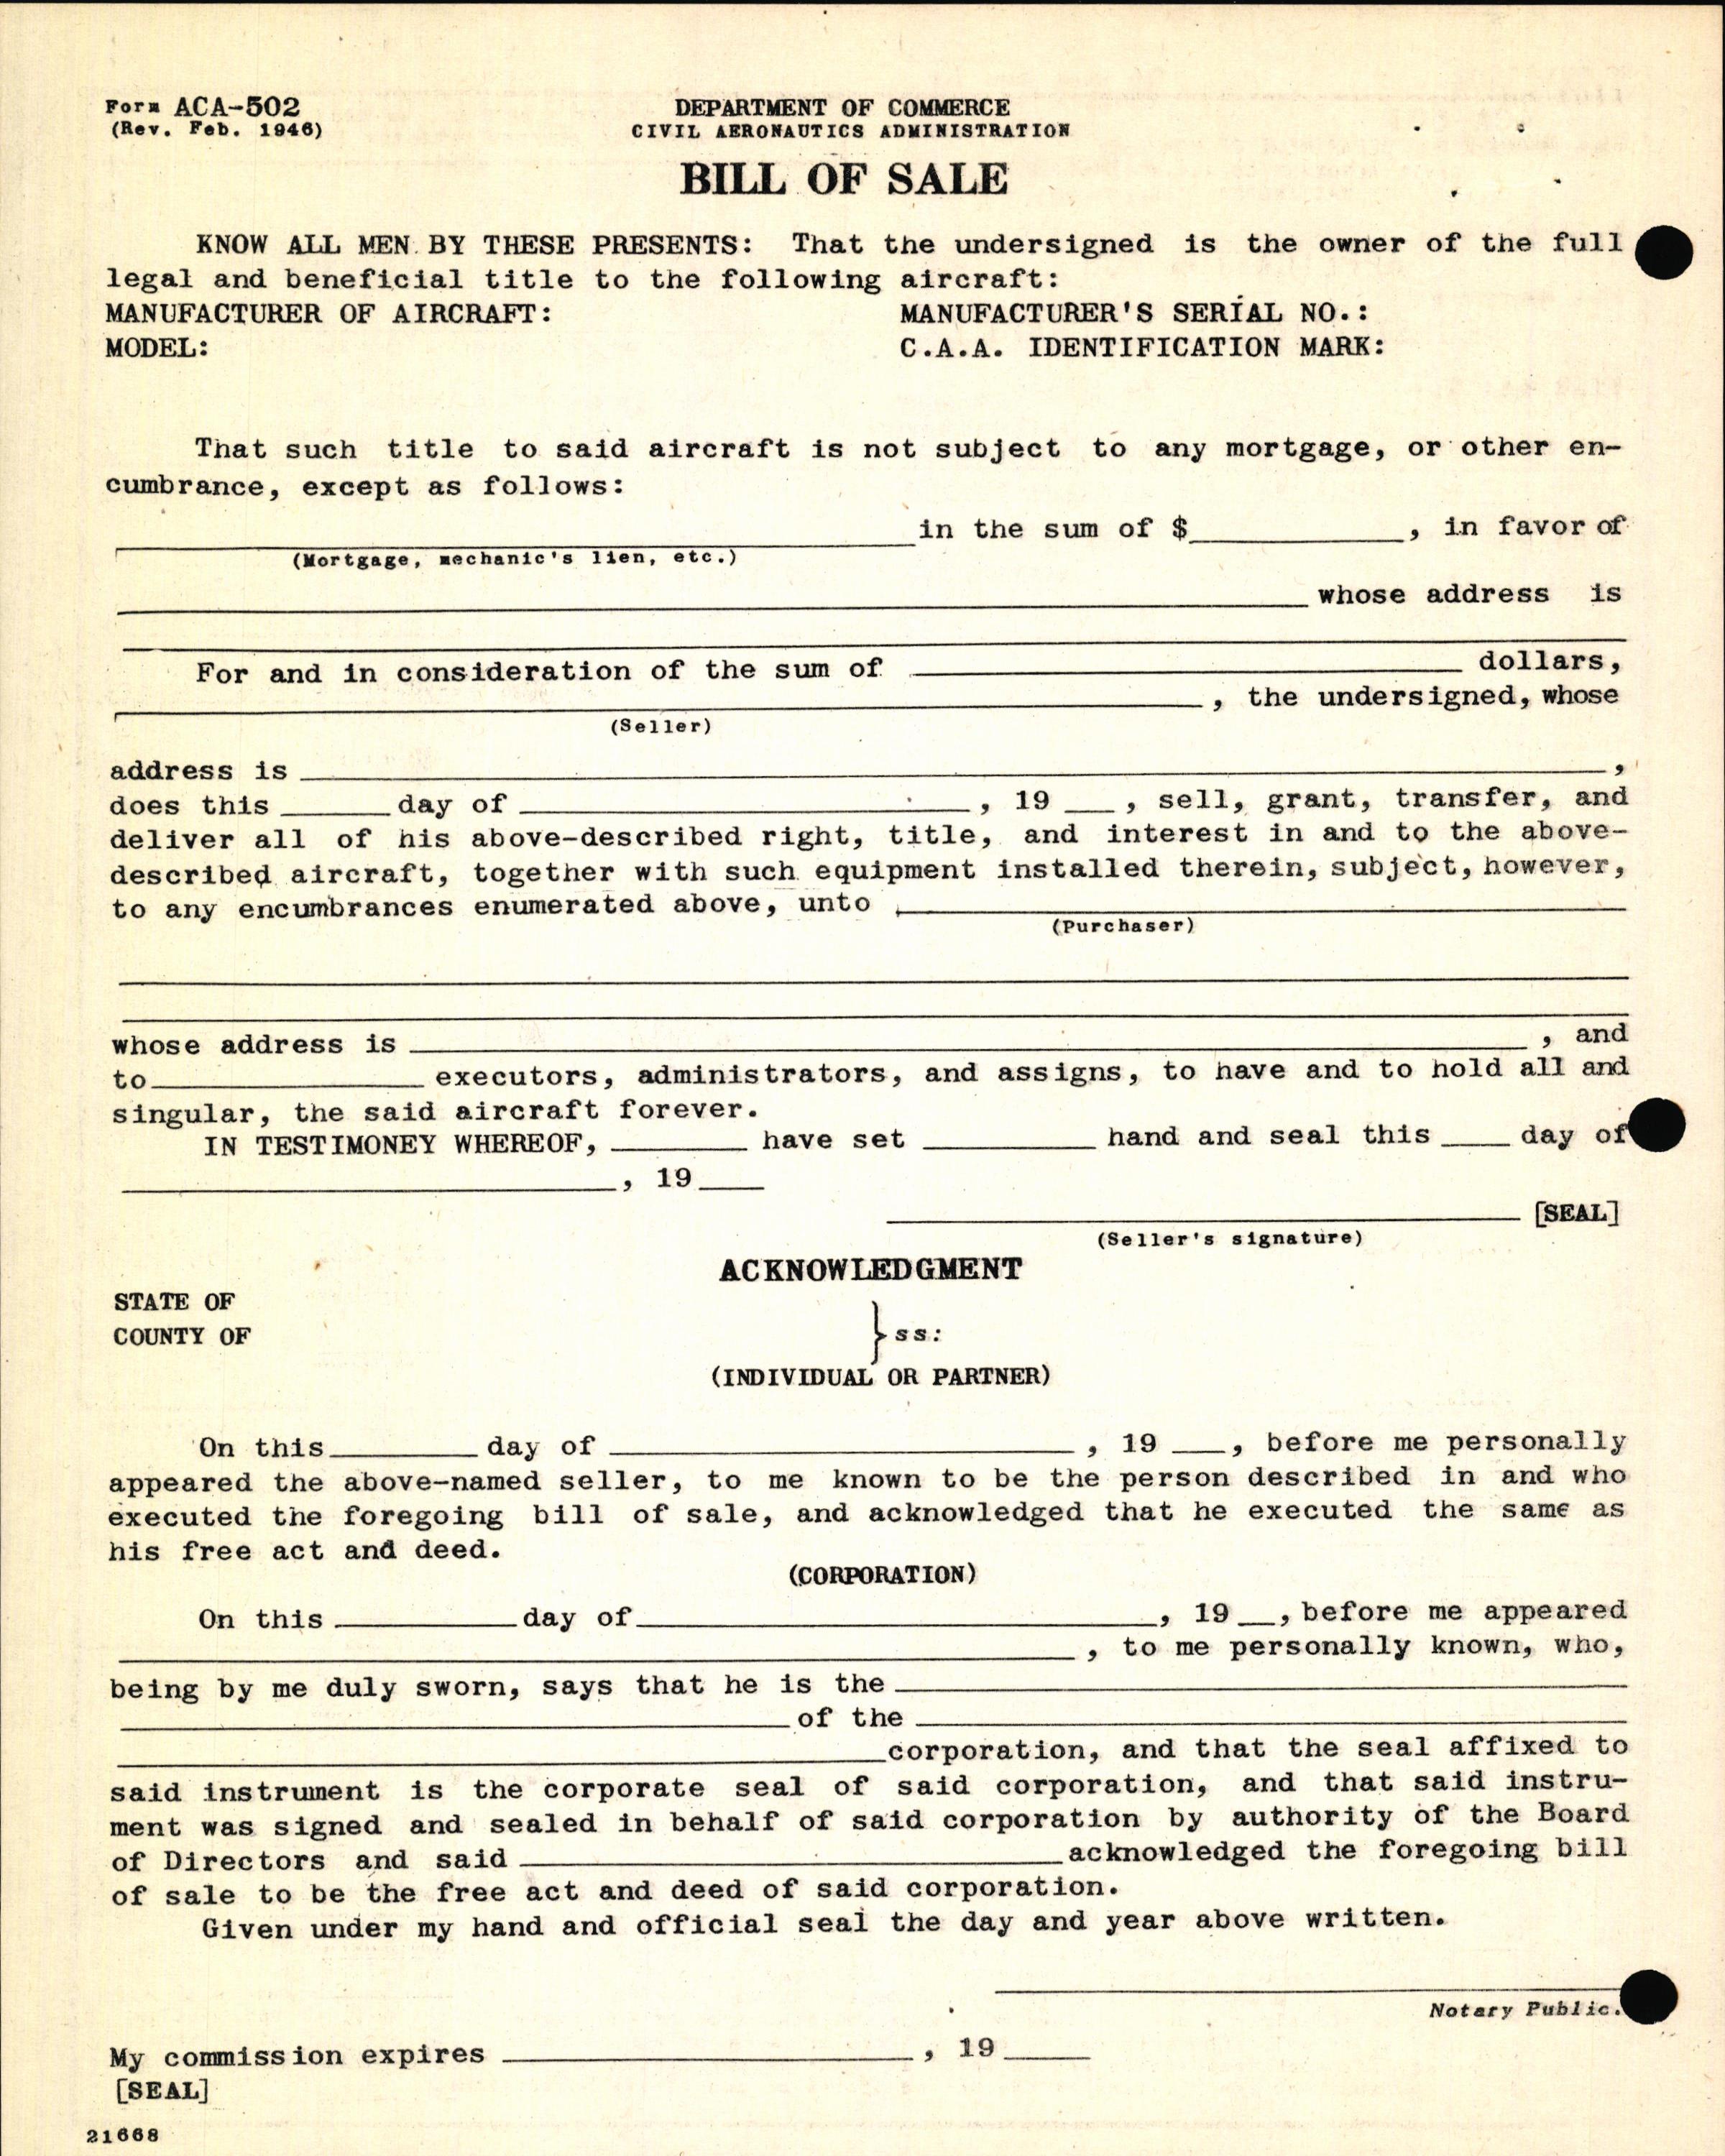 Sample page 6 from AirCorps Library document: Technical Information for Serial Number 1324